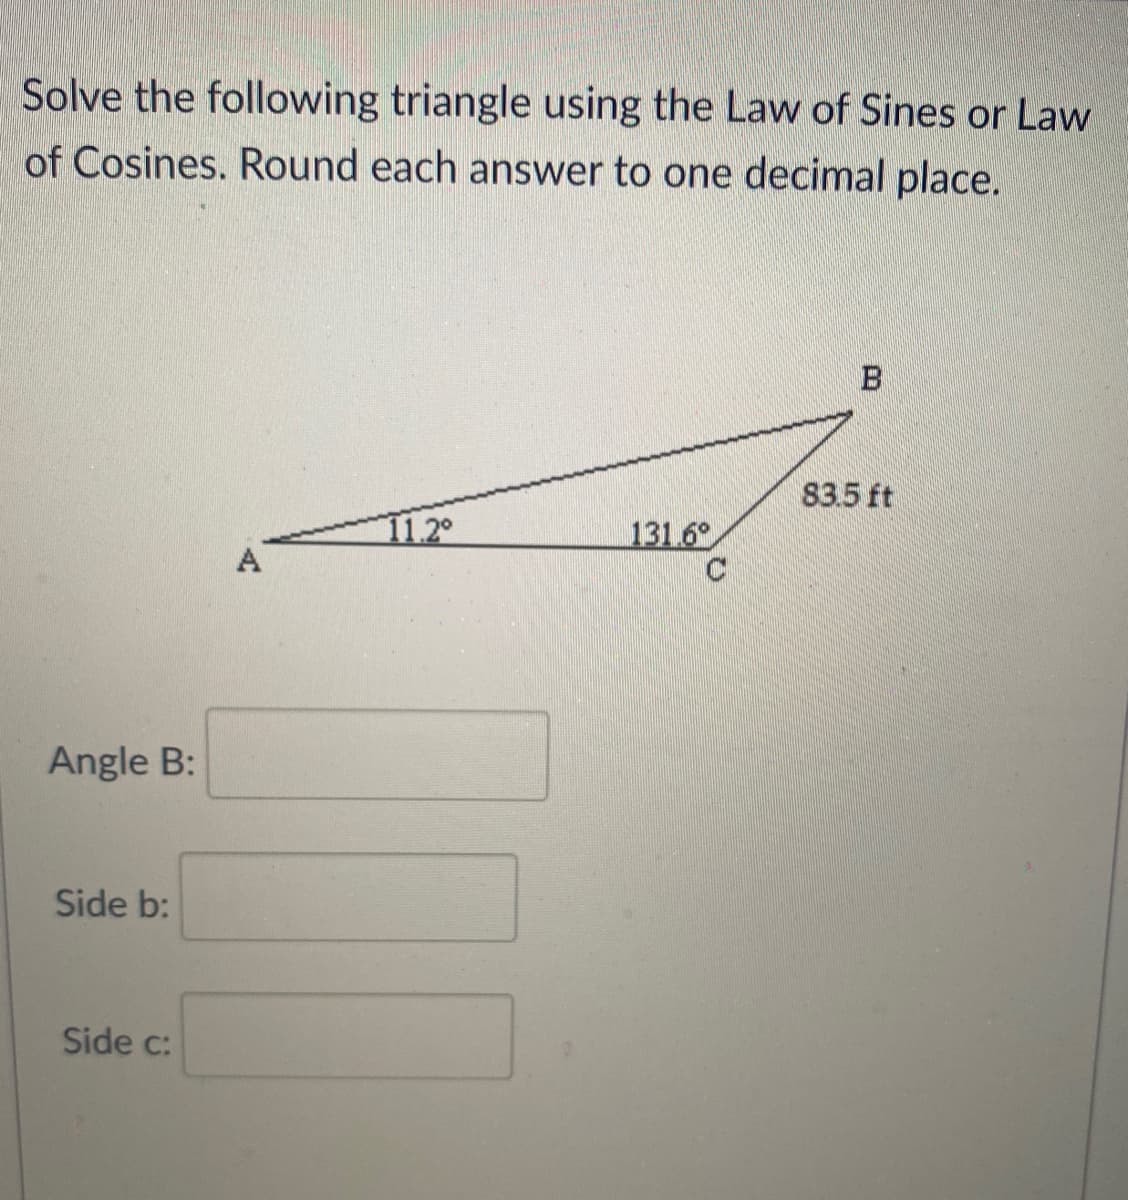 Solve the following triangle using the Law of Sines or Law
of Cosines. Round each answer to one decimal place.
83.5 ft
11.2°
131.6°
A
Angle B:
Side b:
Side c:
